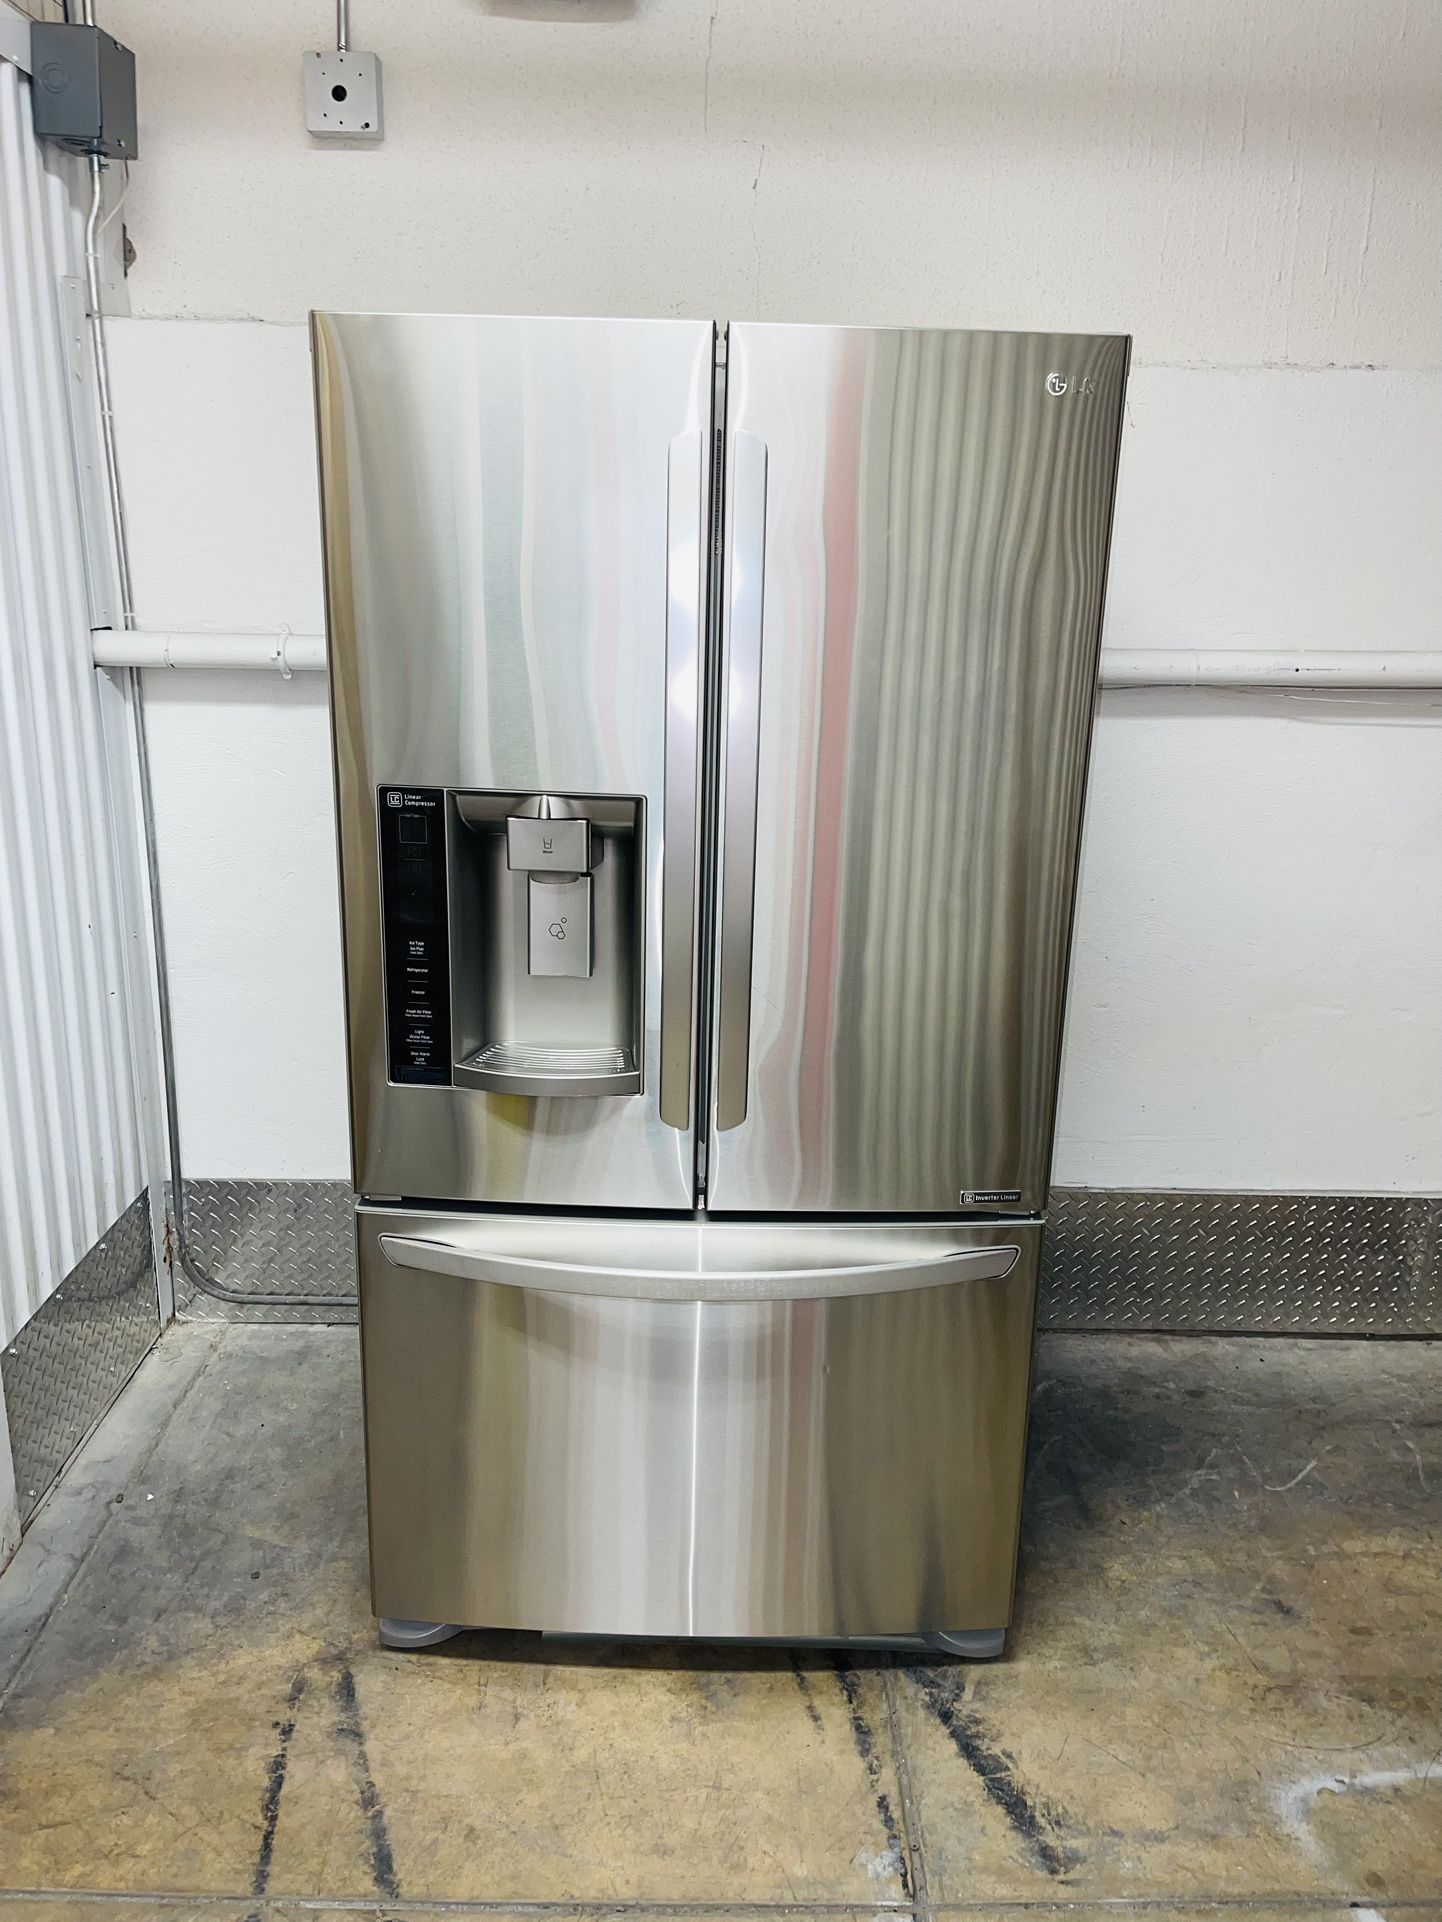 LG refrigerator stainless steel 36X69X29 in very good condition a receipt for 60 days warranty